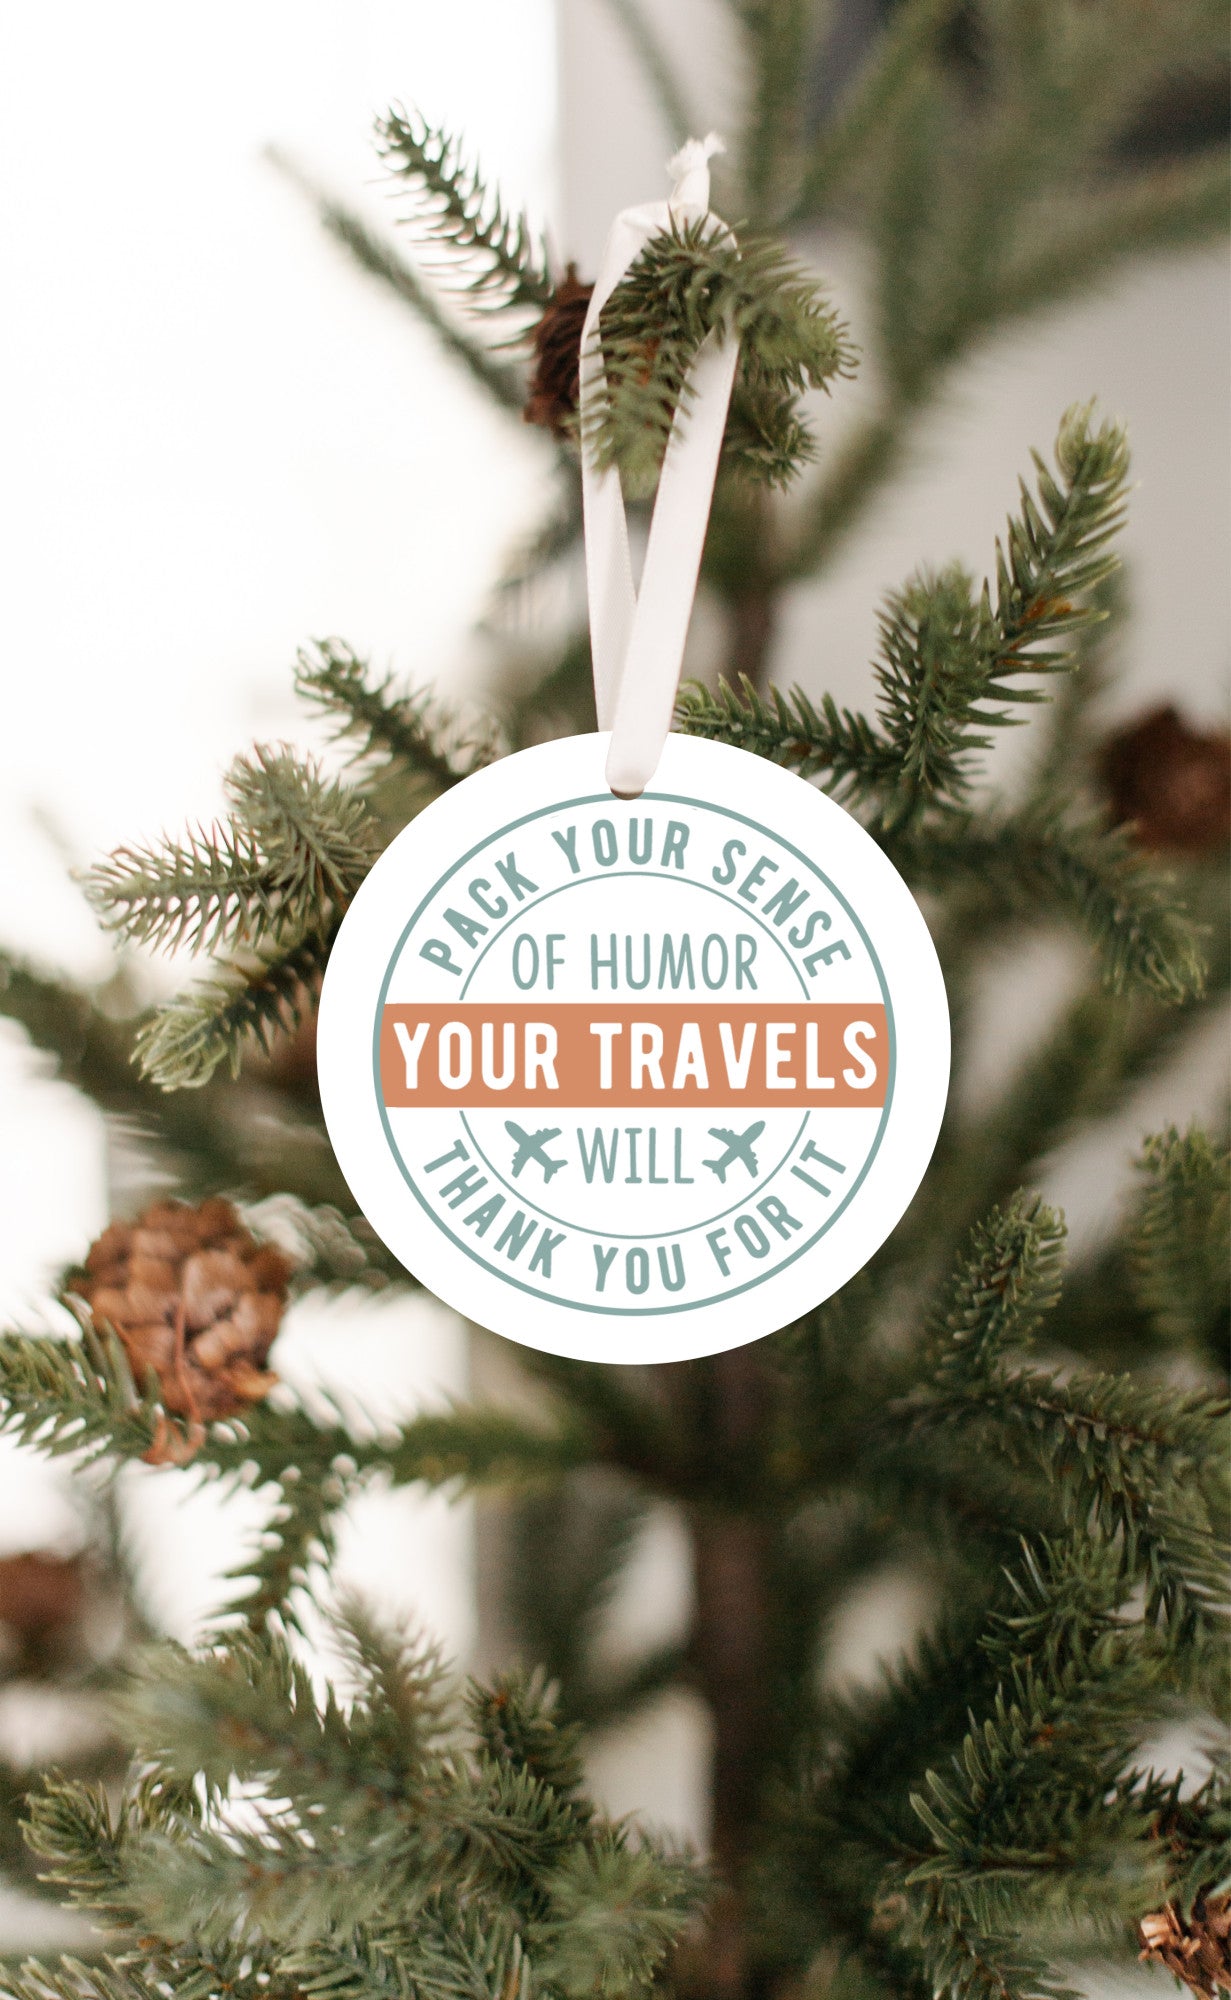 Pack Your Sense of Humor Your Travels Will Thank You For It Ornament